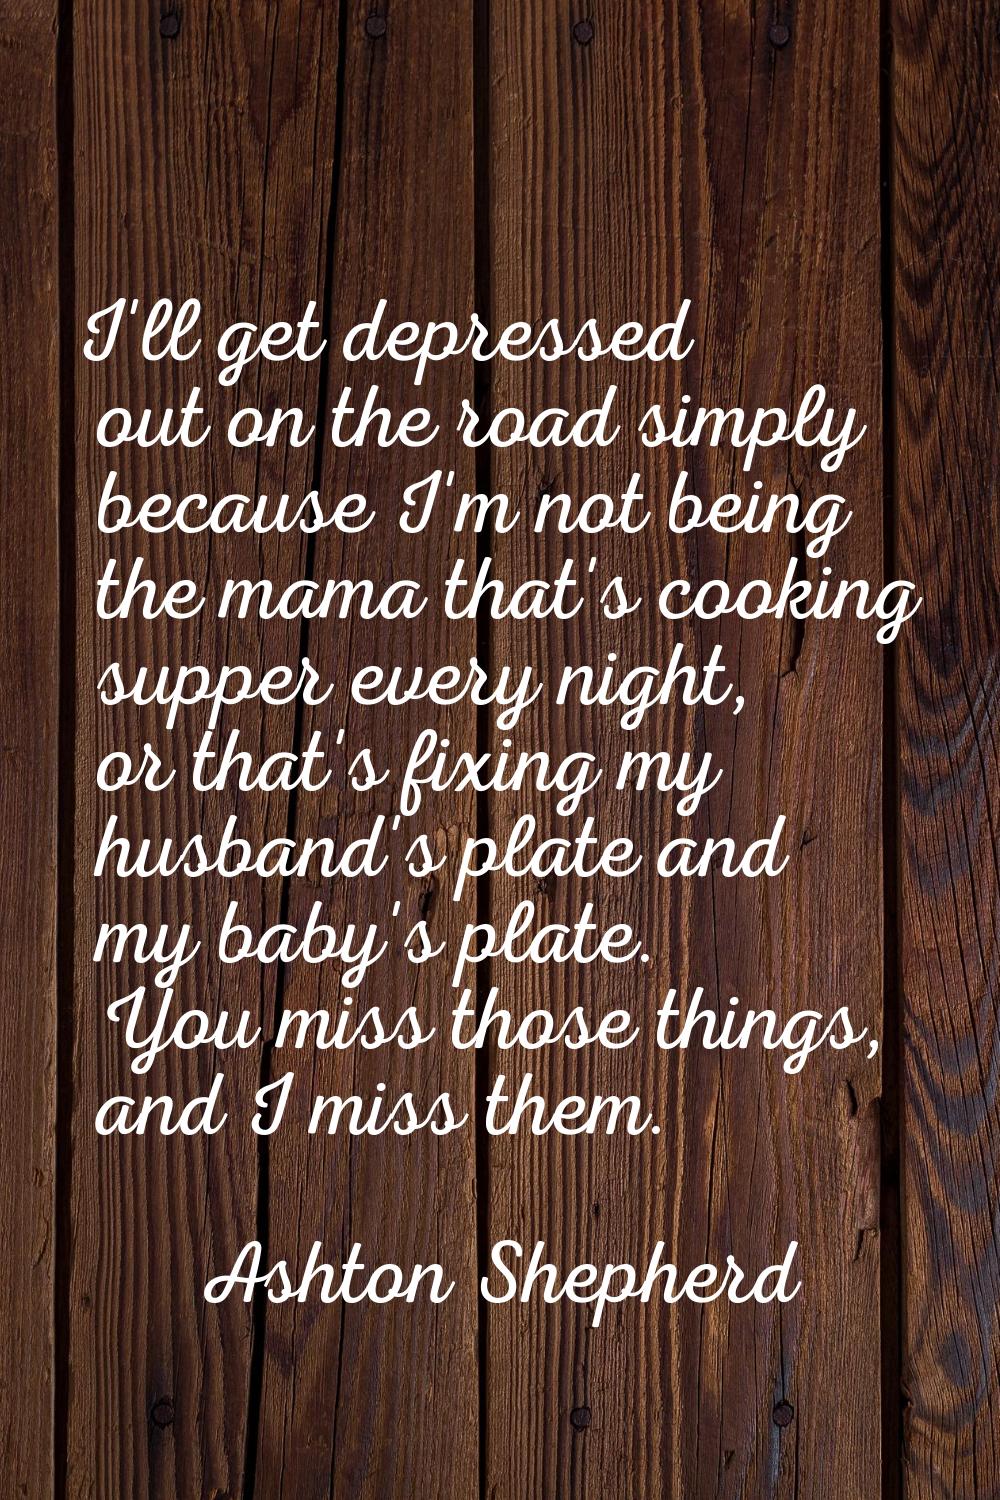 I'll get depressed out on the road simply because I'm not being the mama that's cooking supper ever